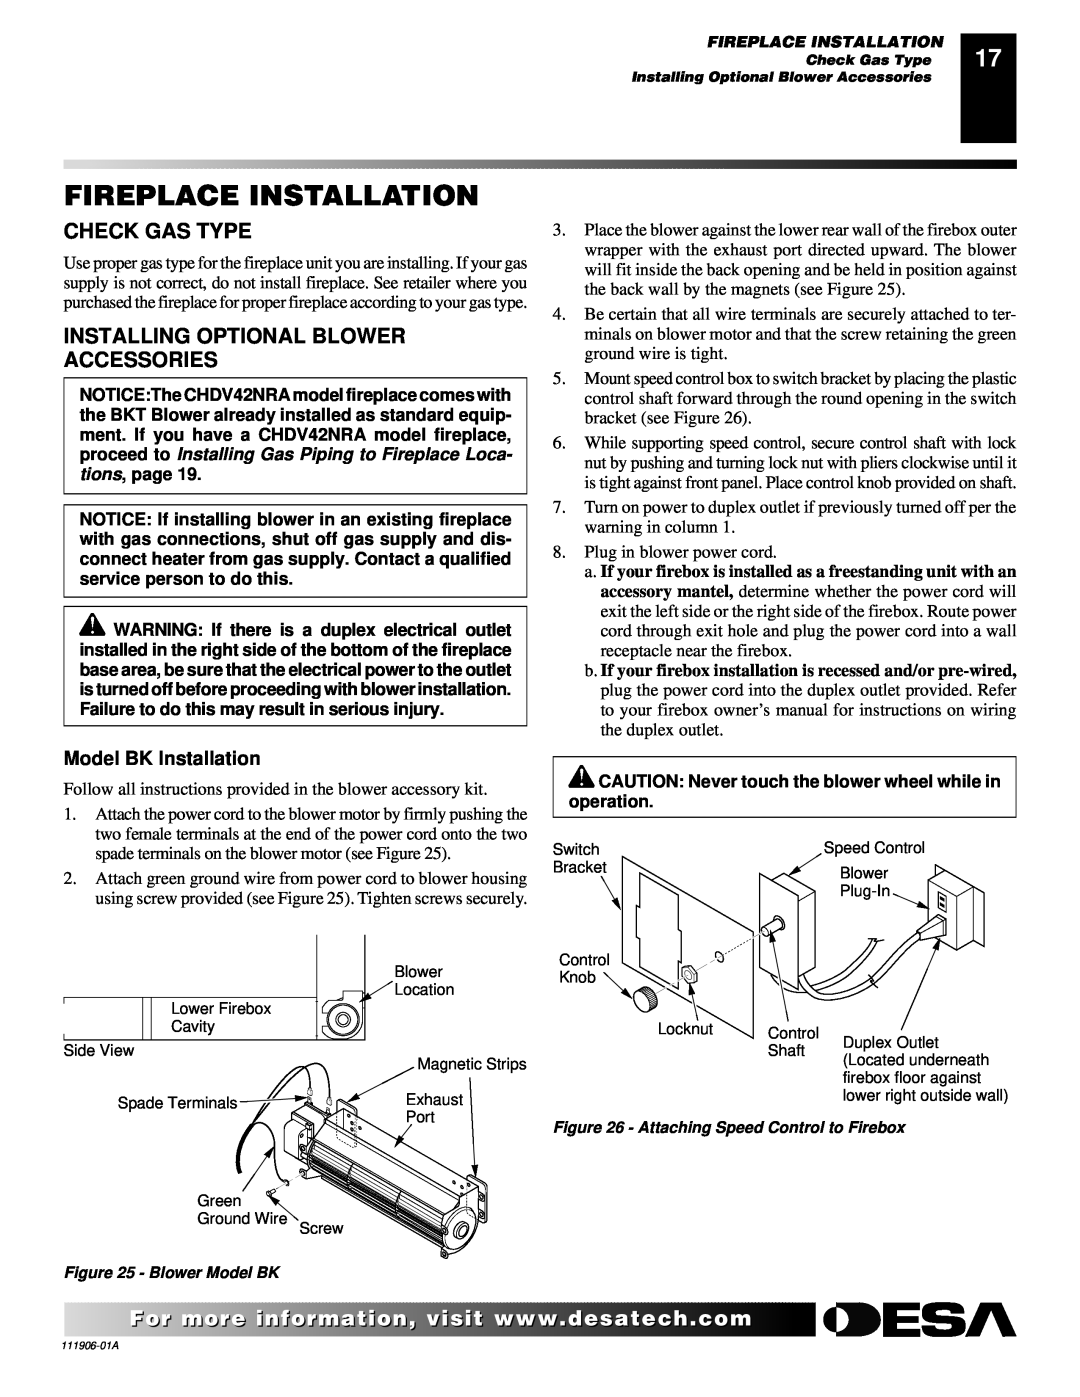 Desa (V)V42NA(1) installation manual Fireplace Installation, Check Gas Type, Installing Optional Blower Accessories 